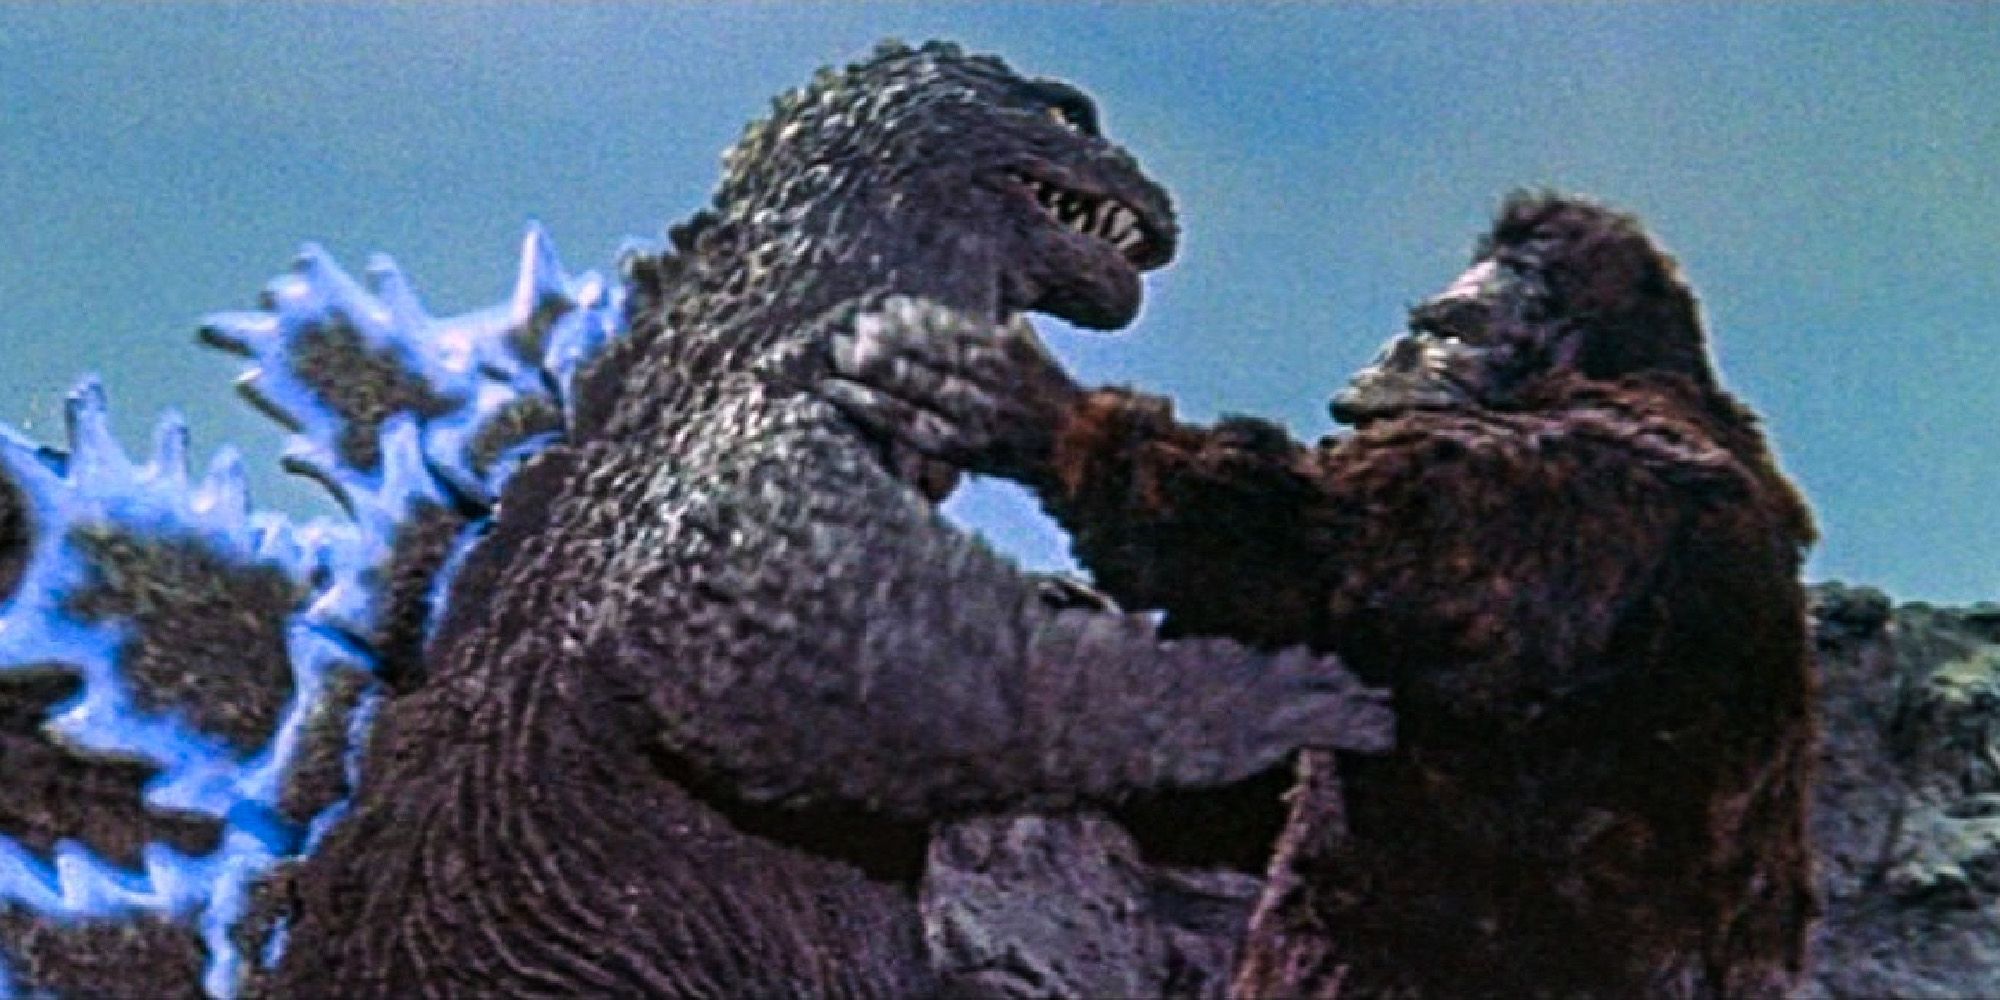 There are no official photos of Godzilla Vs. Kong in our universe, but here's a 58-year-old facsimile. (Image: Toho)